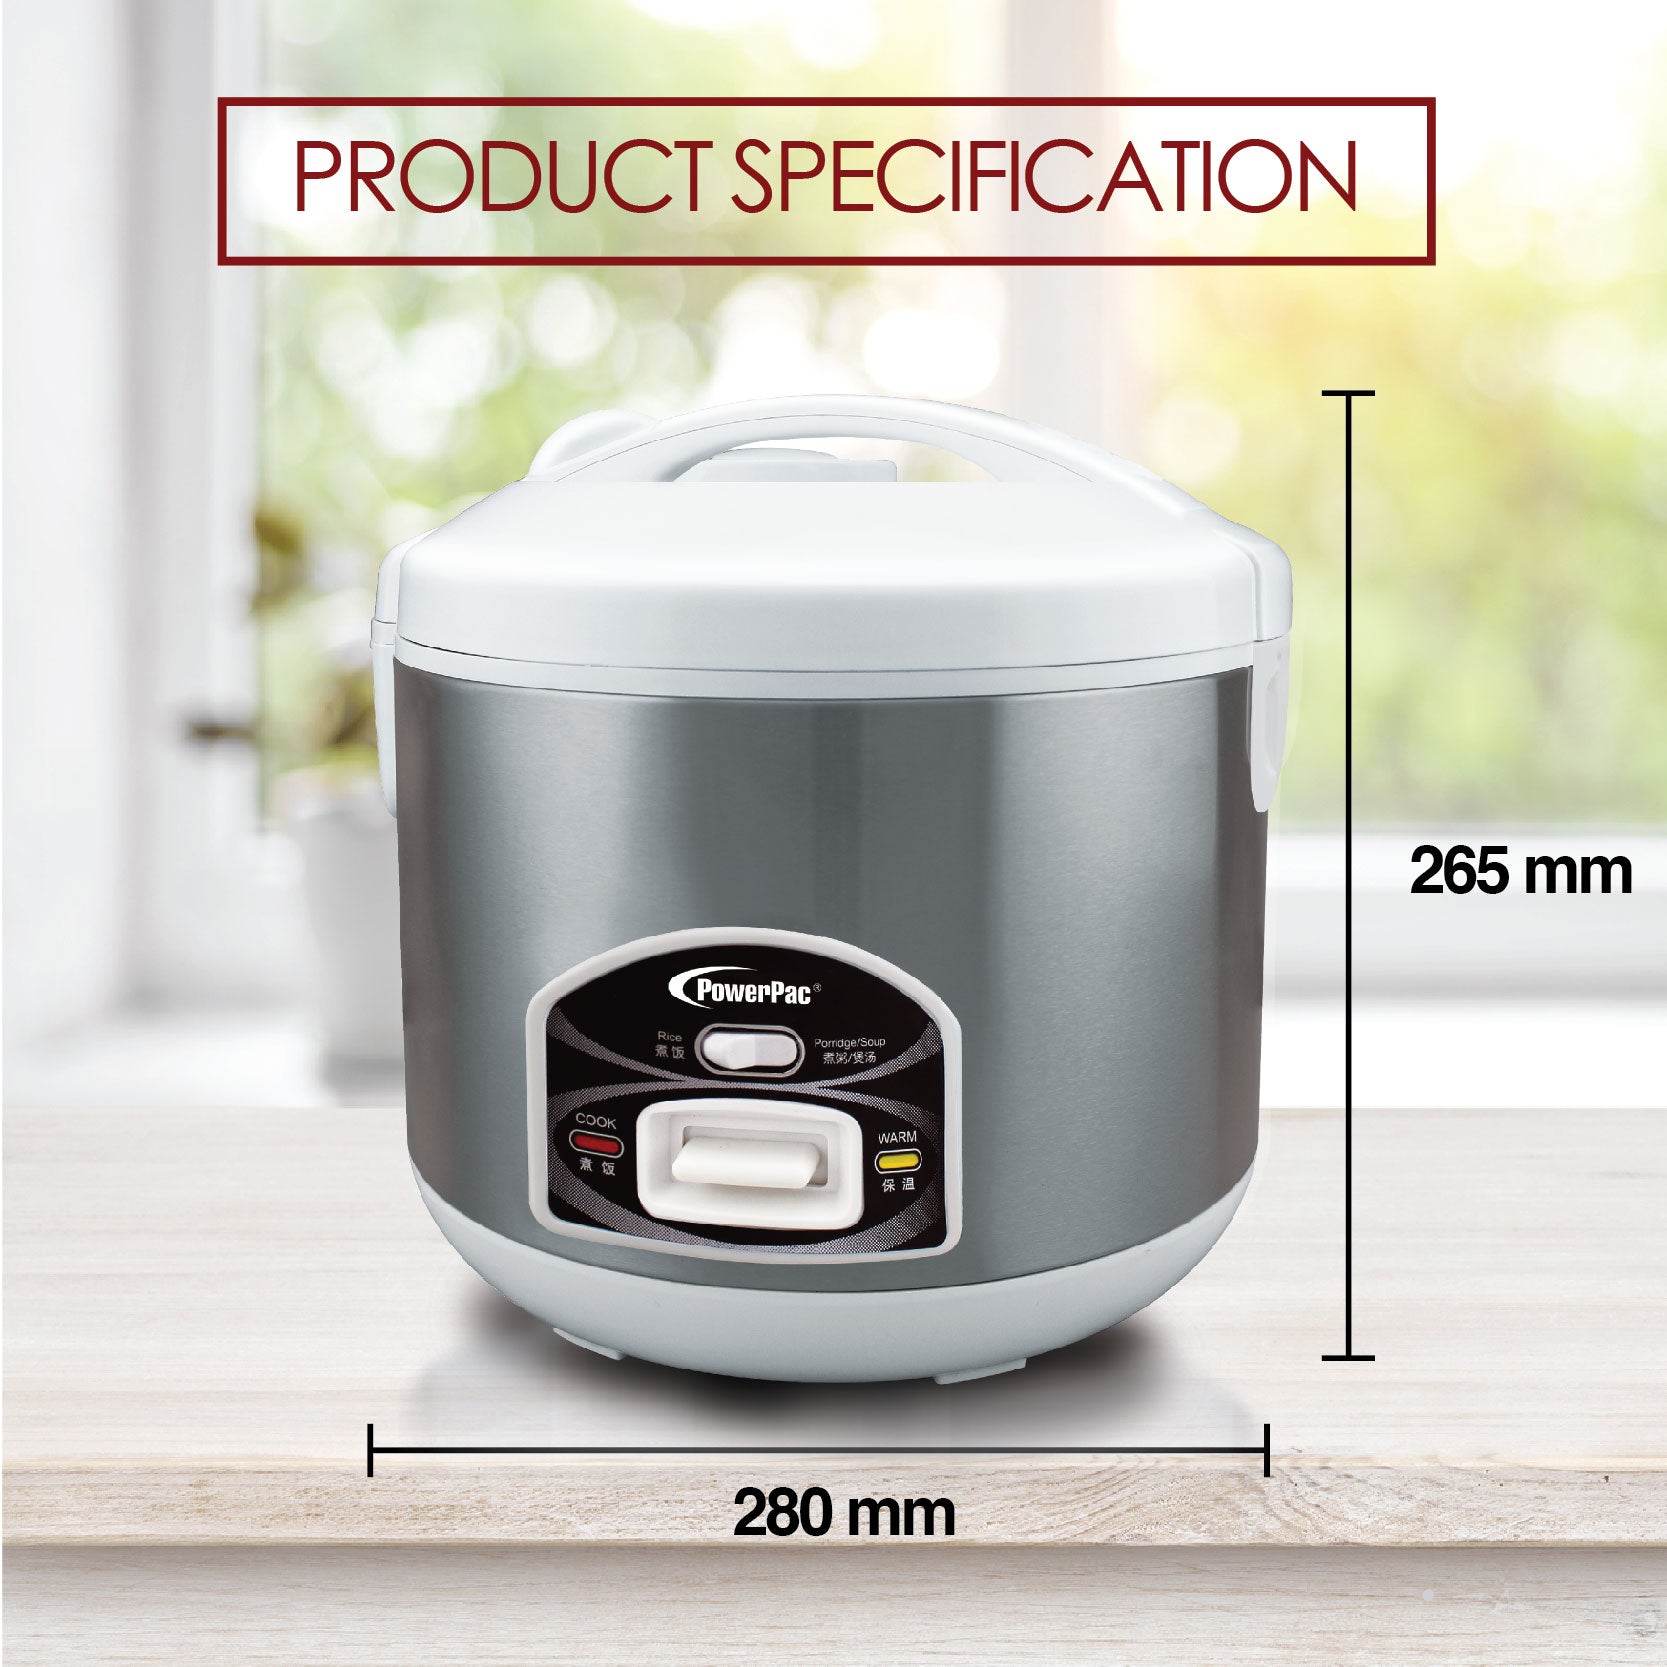 Buffalo Rice Cooker 1.8L for sale online